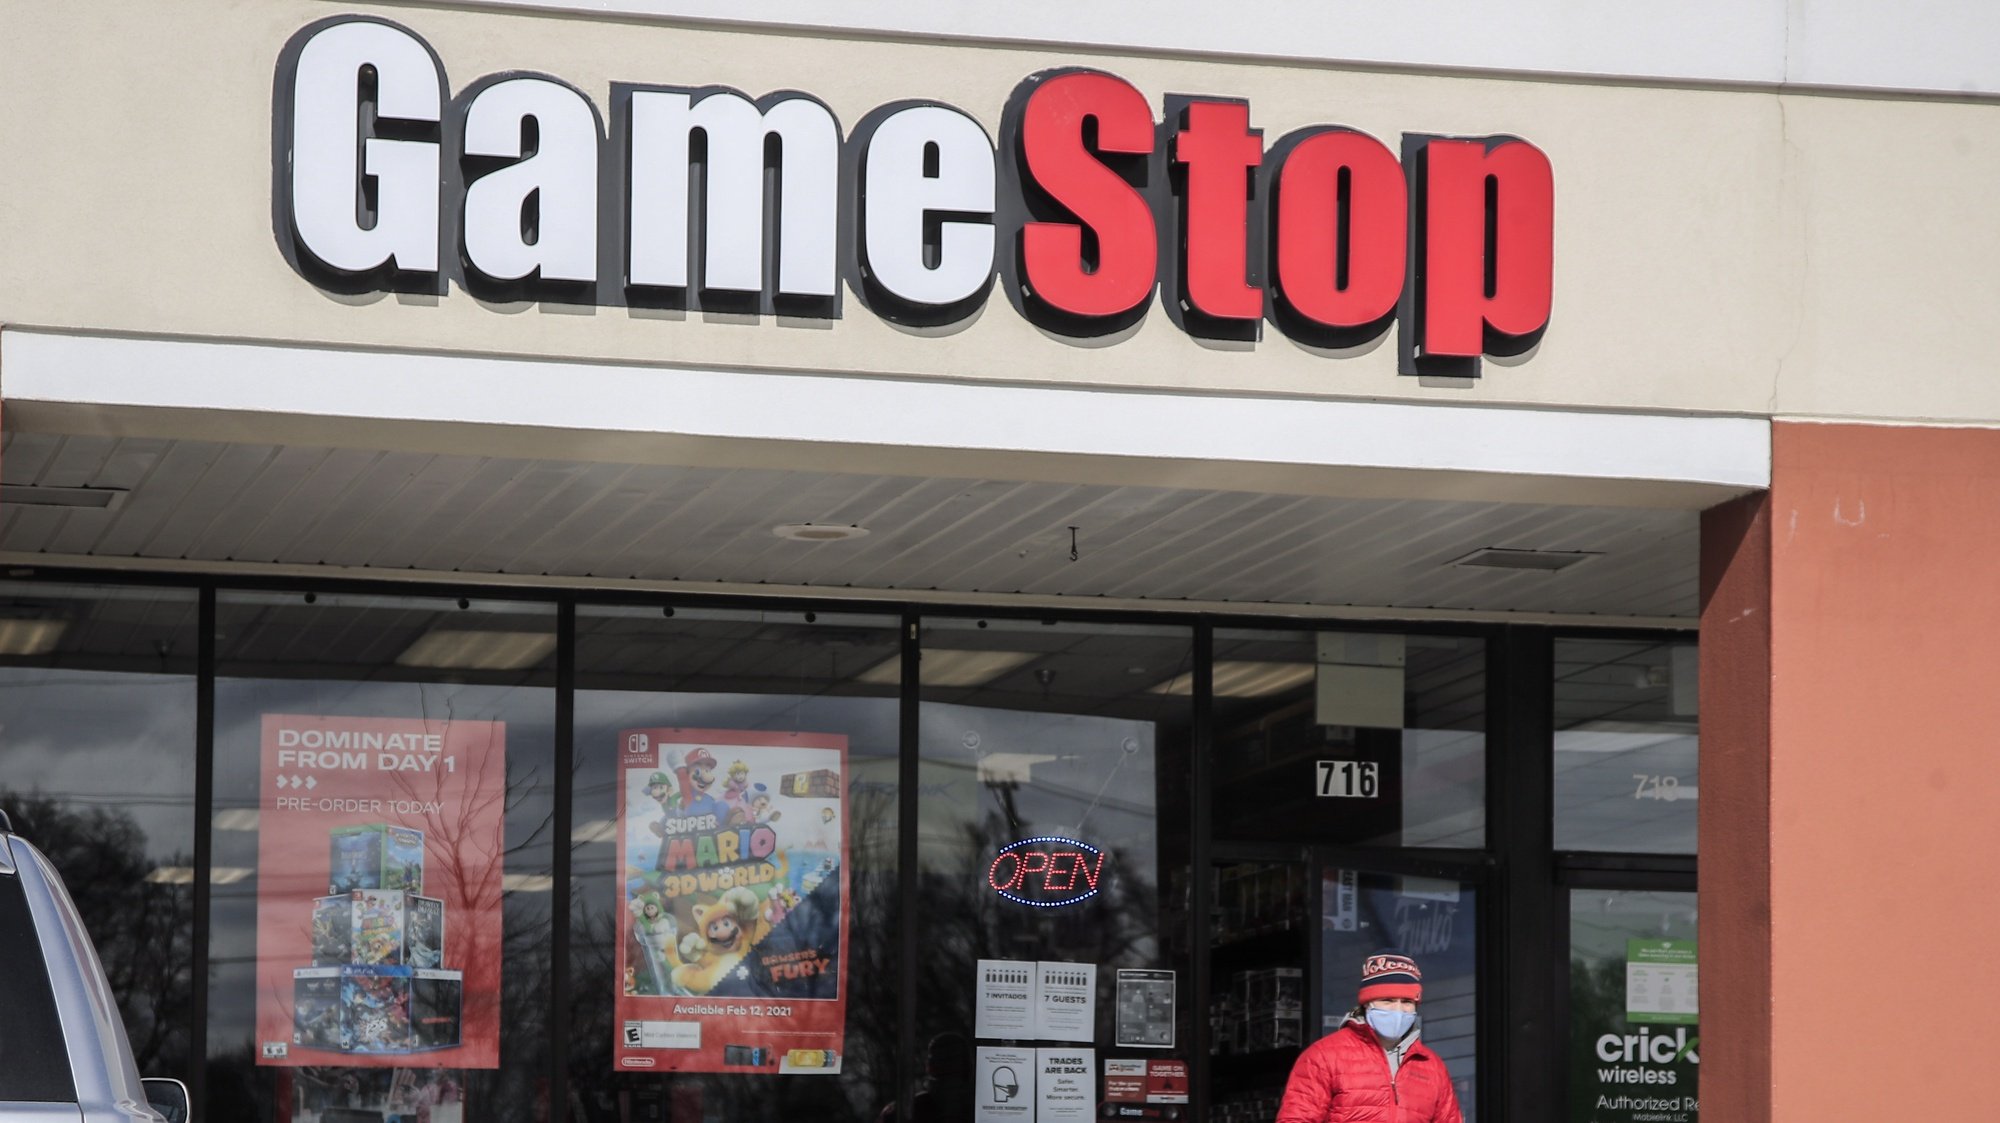 epa08969954 A customer leaves a GameStop store with his purchase in Round Lake Beach, Illinois, USA, 27 January 2021. The electronic game retailer has seen it&#039;s stock price soar from 3.25 US dollars in April 2020 to close at 347.51 US dollars on 27 January. The company has drawn interest from investors in online chat groups and created as much as 3 billion US dollars in value losses for short sellers.  EPA/TANNEN MAURY